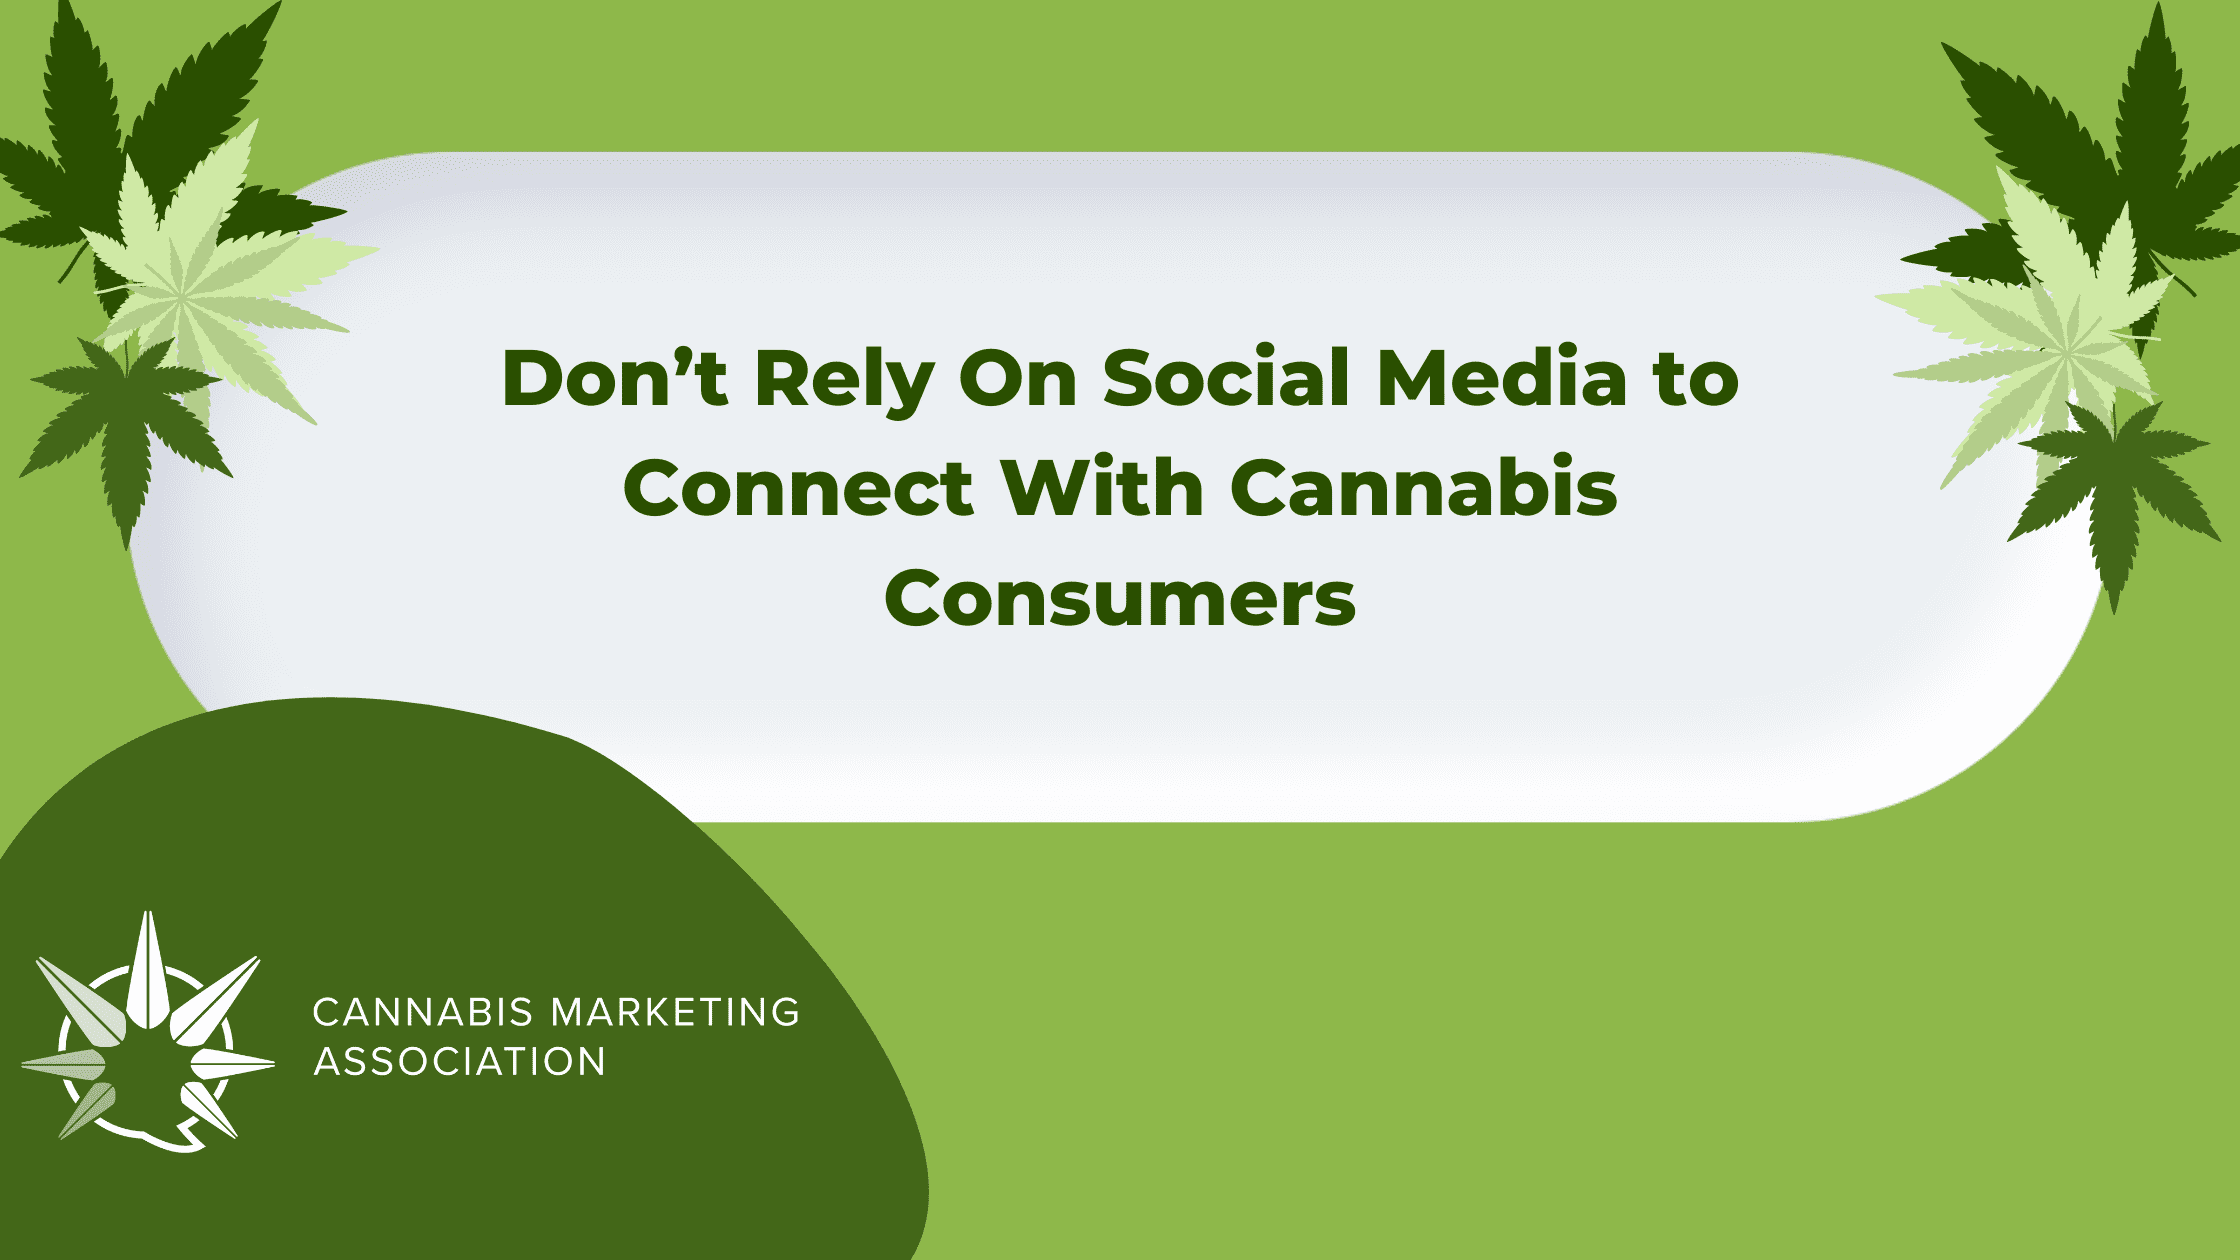 Don’t Rely On Social Media to Connect With Cannabis Consumers